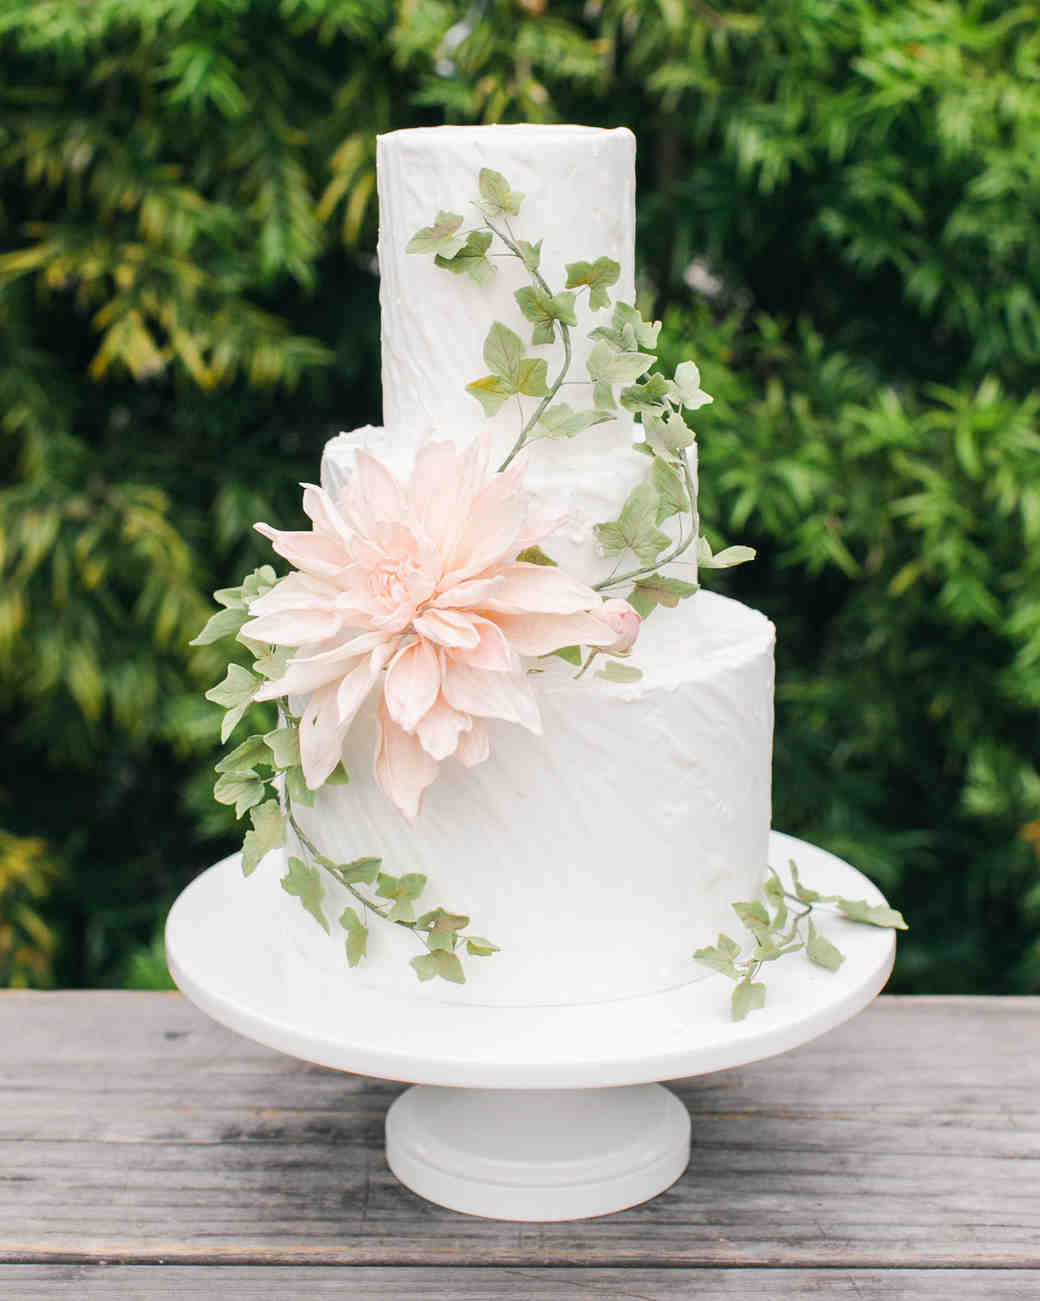  Wedding  Cakes  with Sugar Flowers  That Look Incredibly Real 